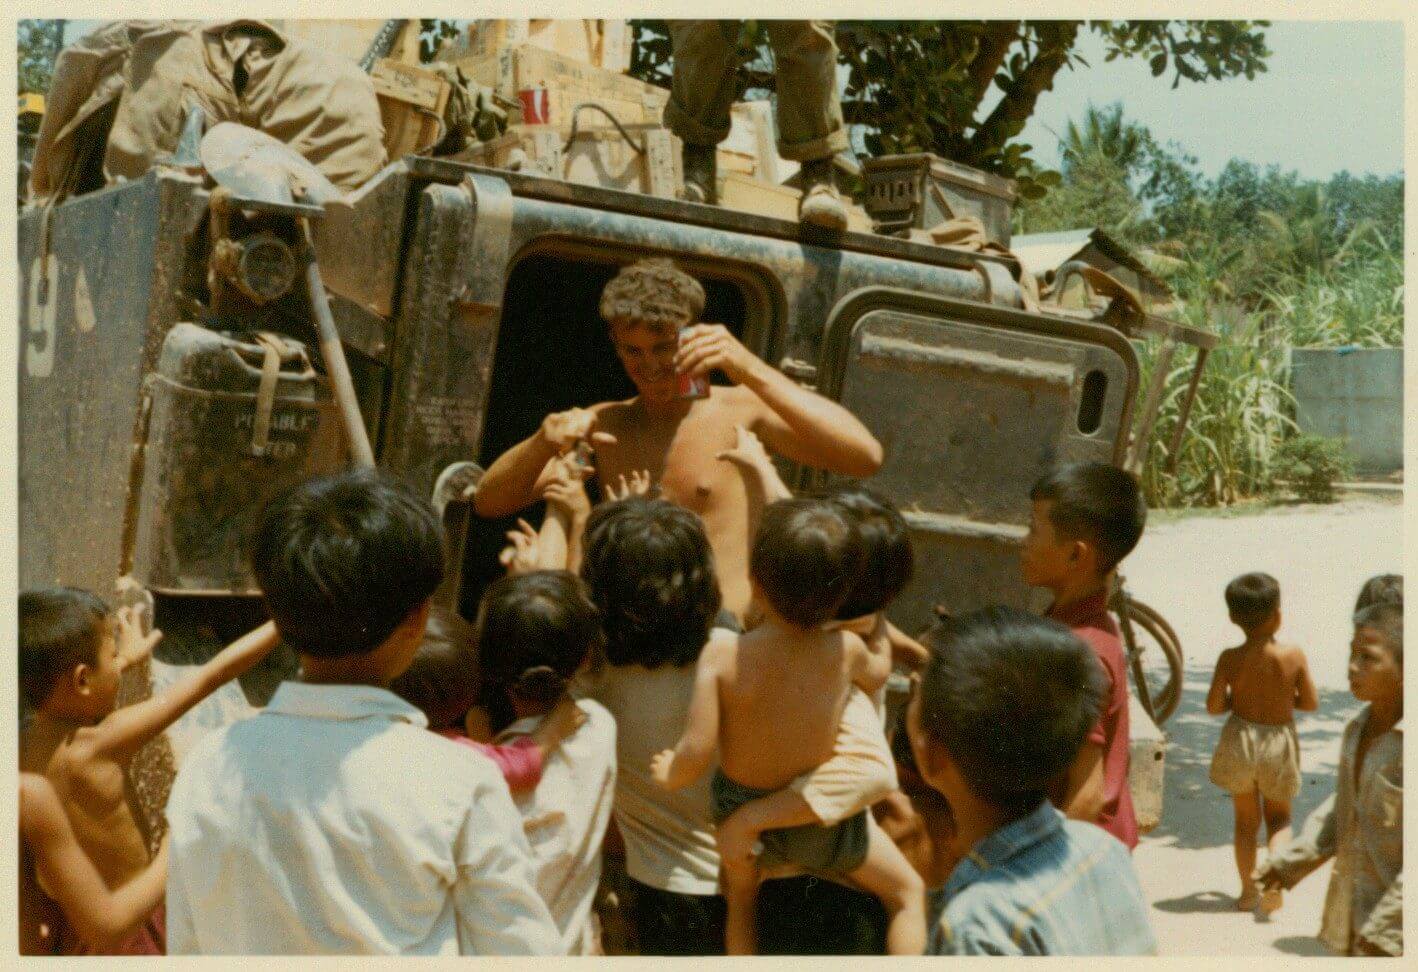 A young G.I. holding a Coke, Vietnamese children reaching up all around him.